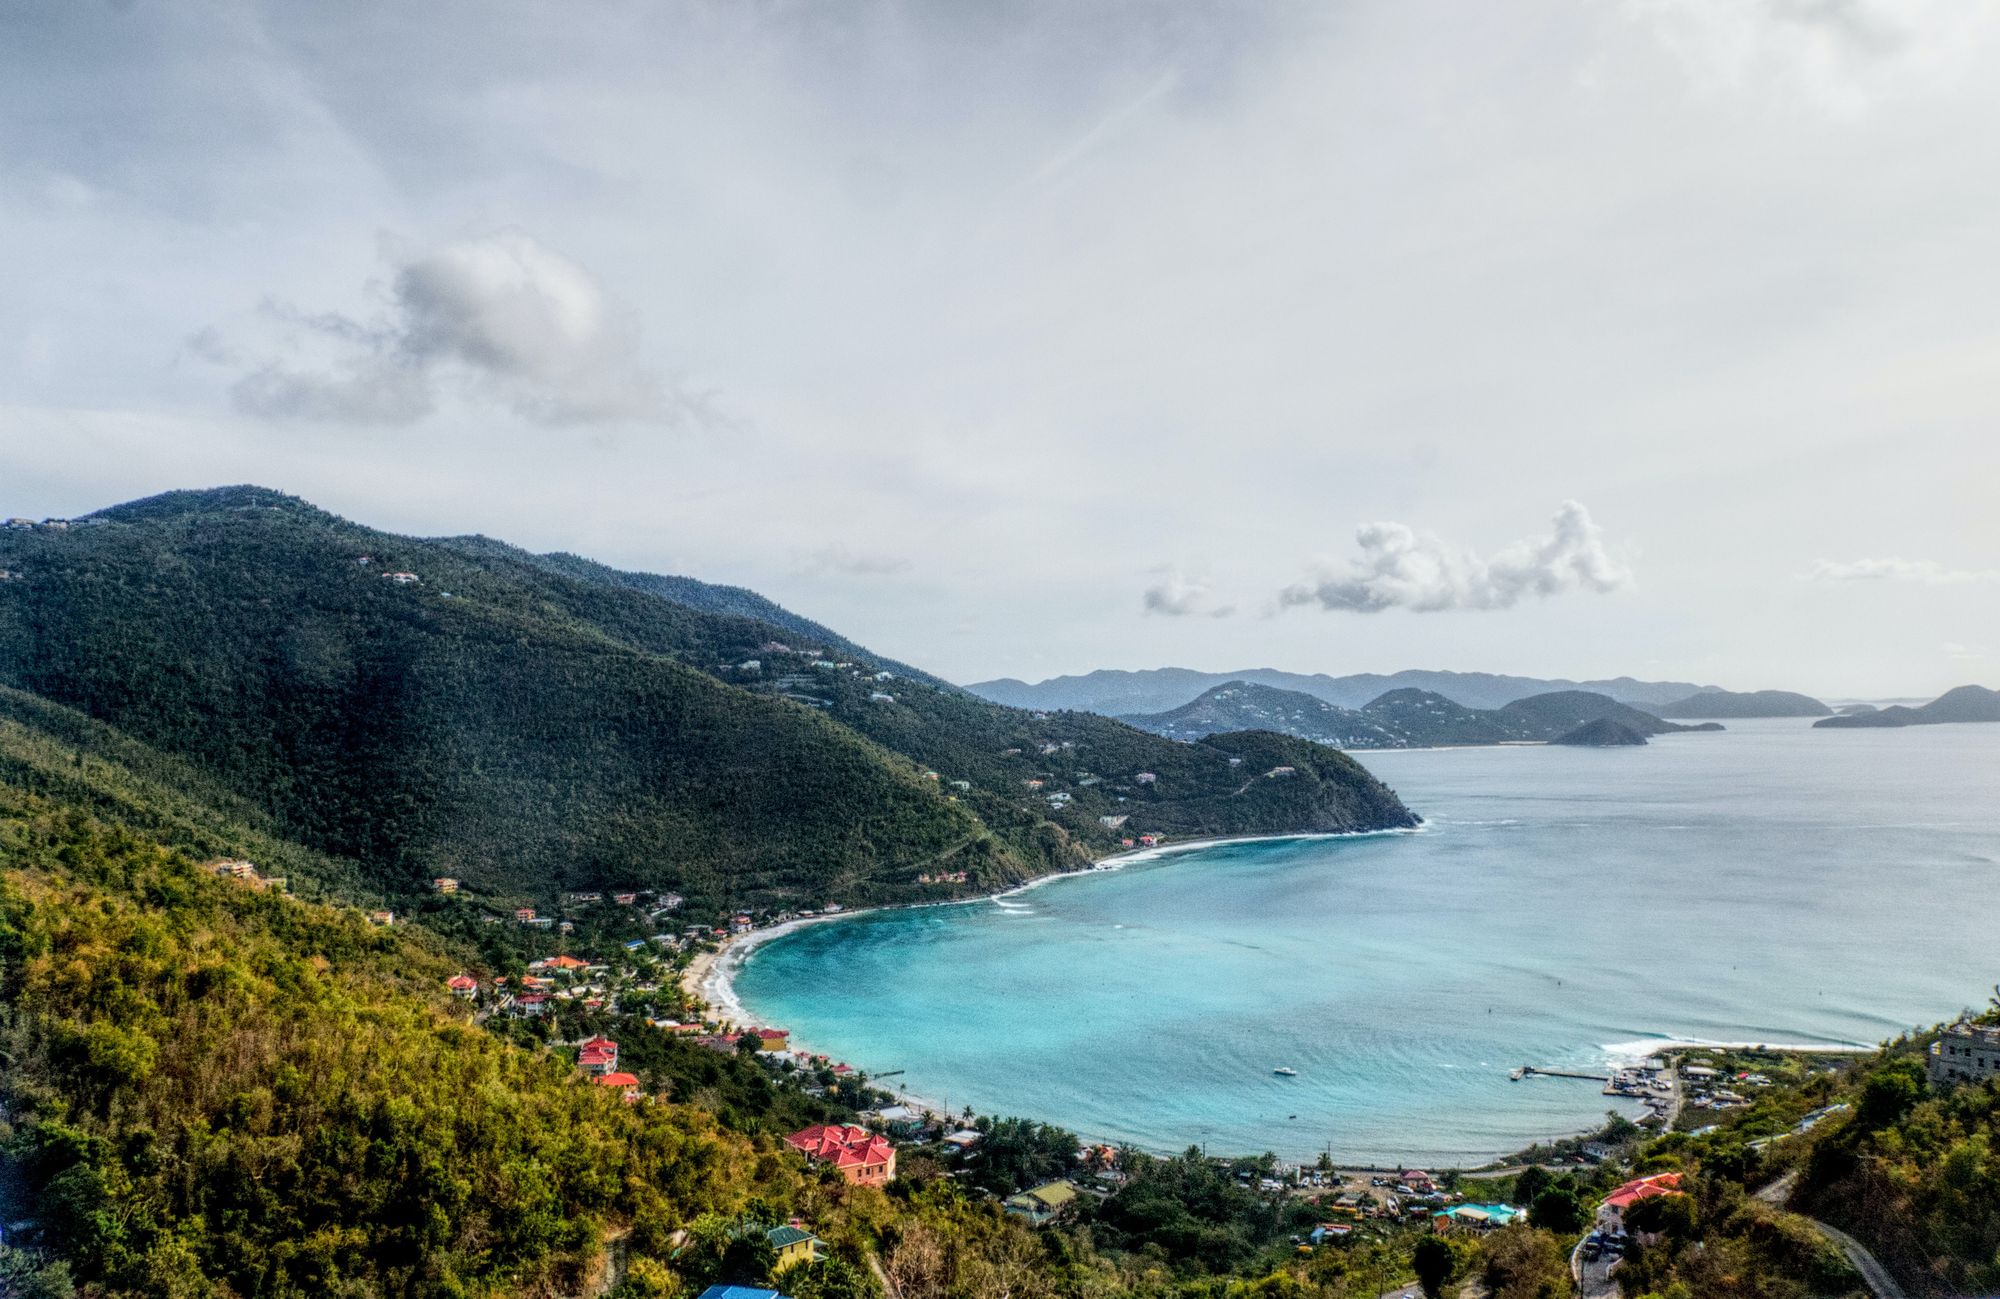 Perfect waves seen from the hilltops of Tortola, one of the Caribbean's undiscovered surfing gems